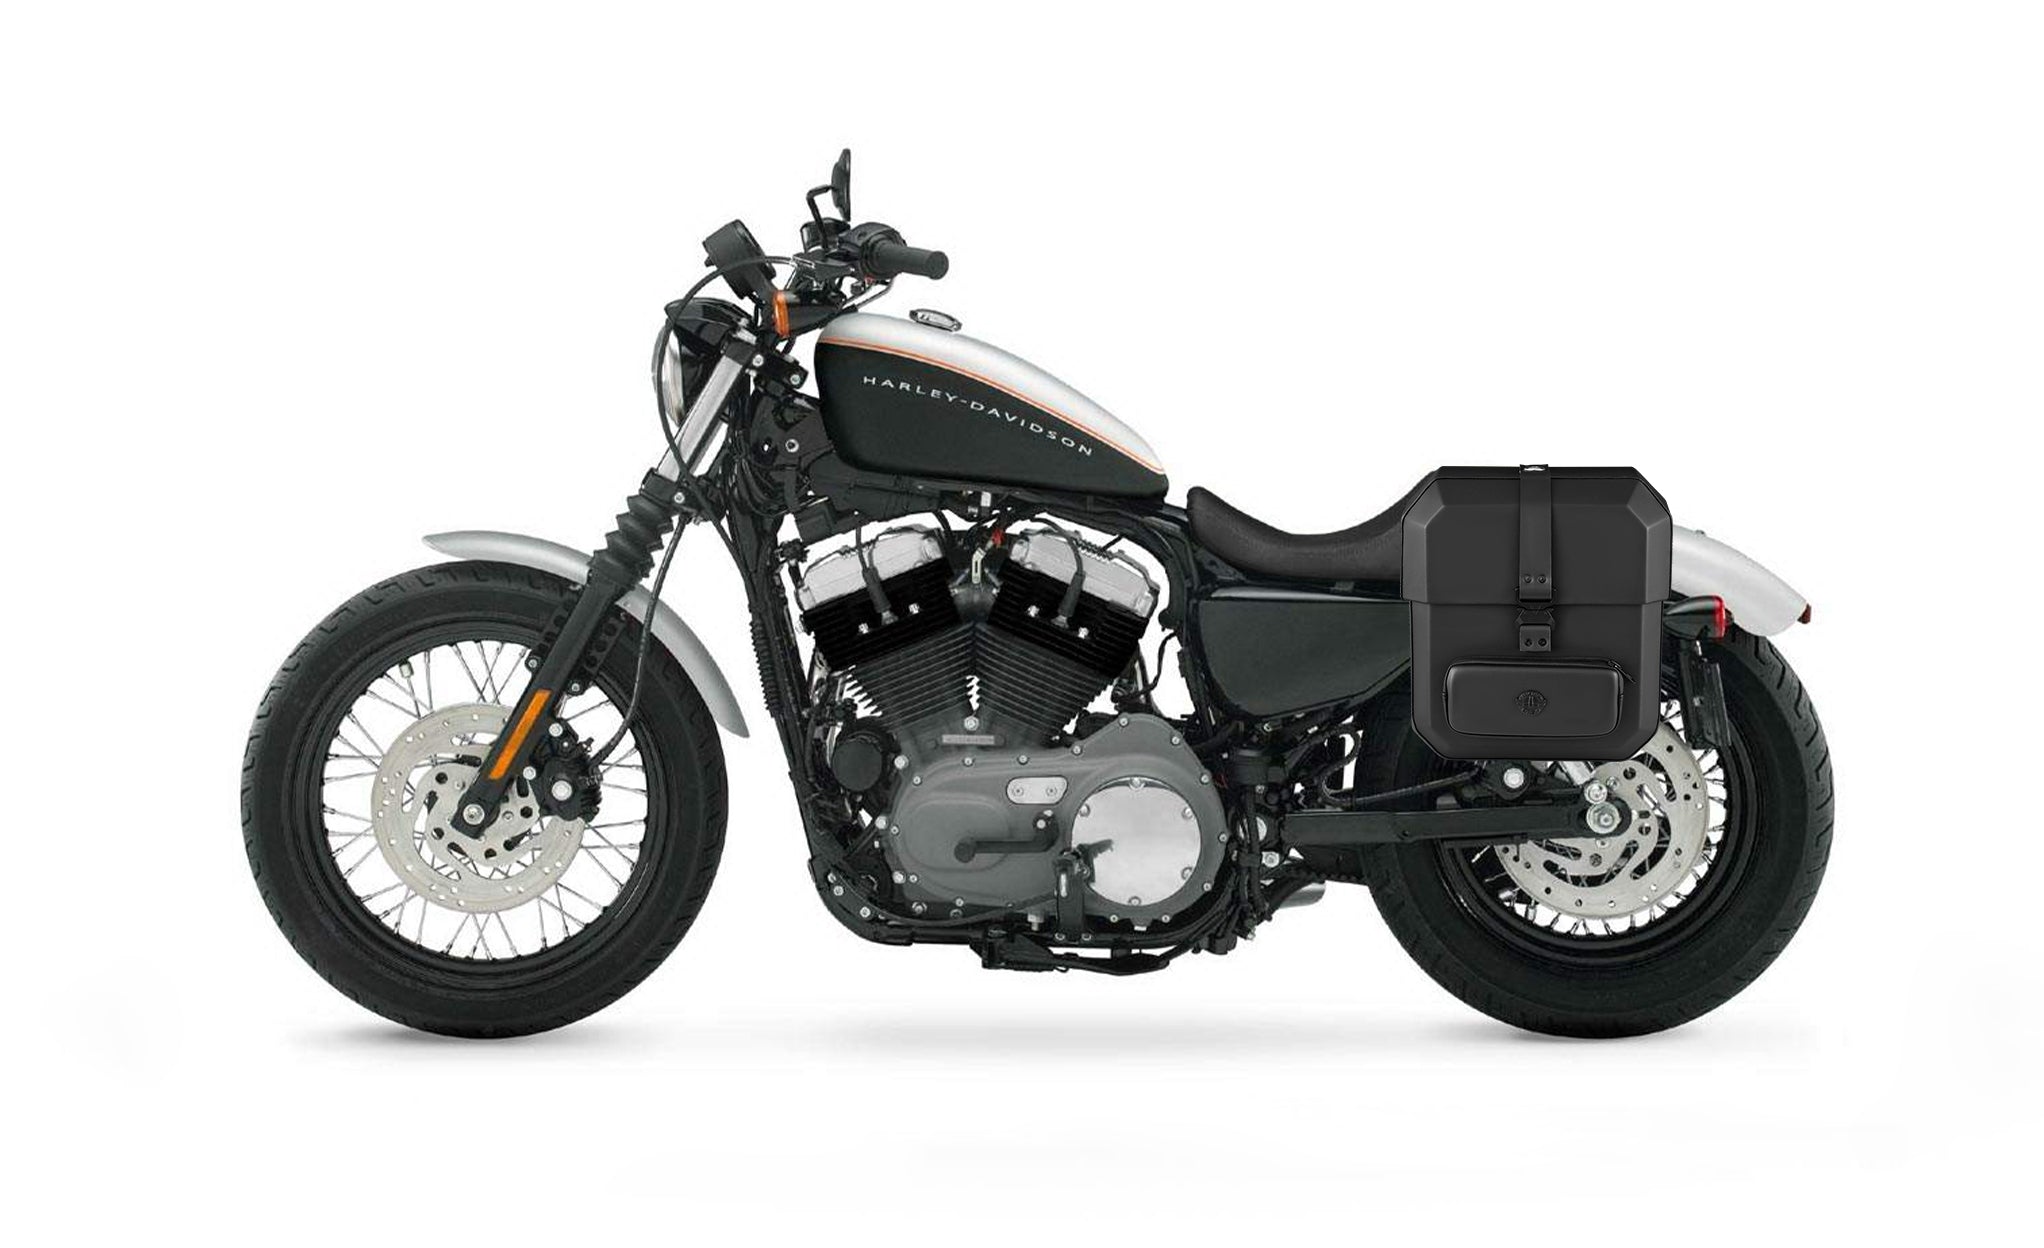 15L - Outlaw Quick Mount Medium Harley Sportster 1200 Nightster XL1200N Hard Solo Saddlebag (Left Only) @expand